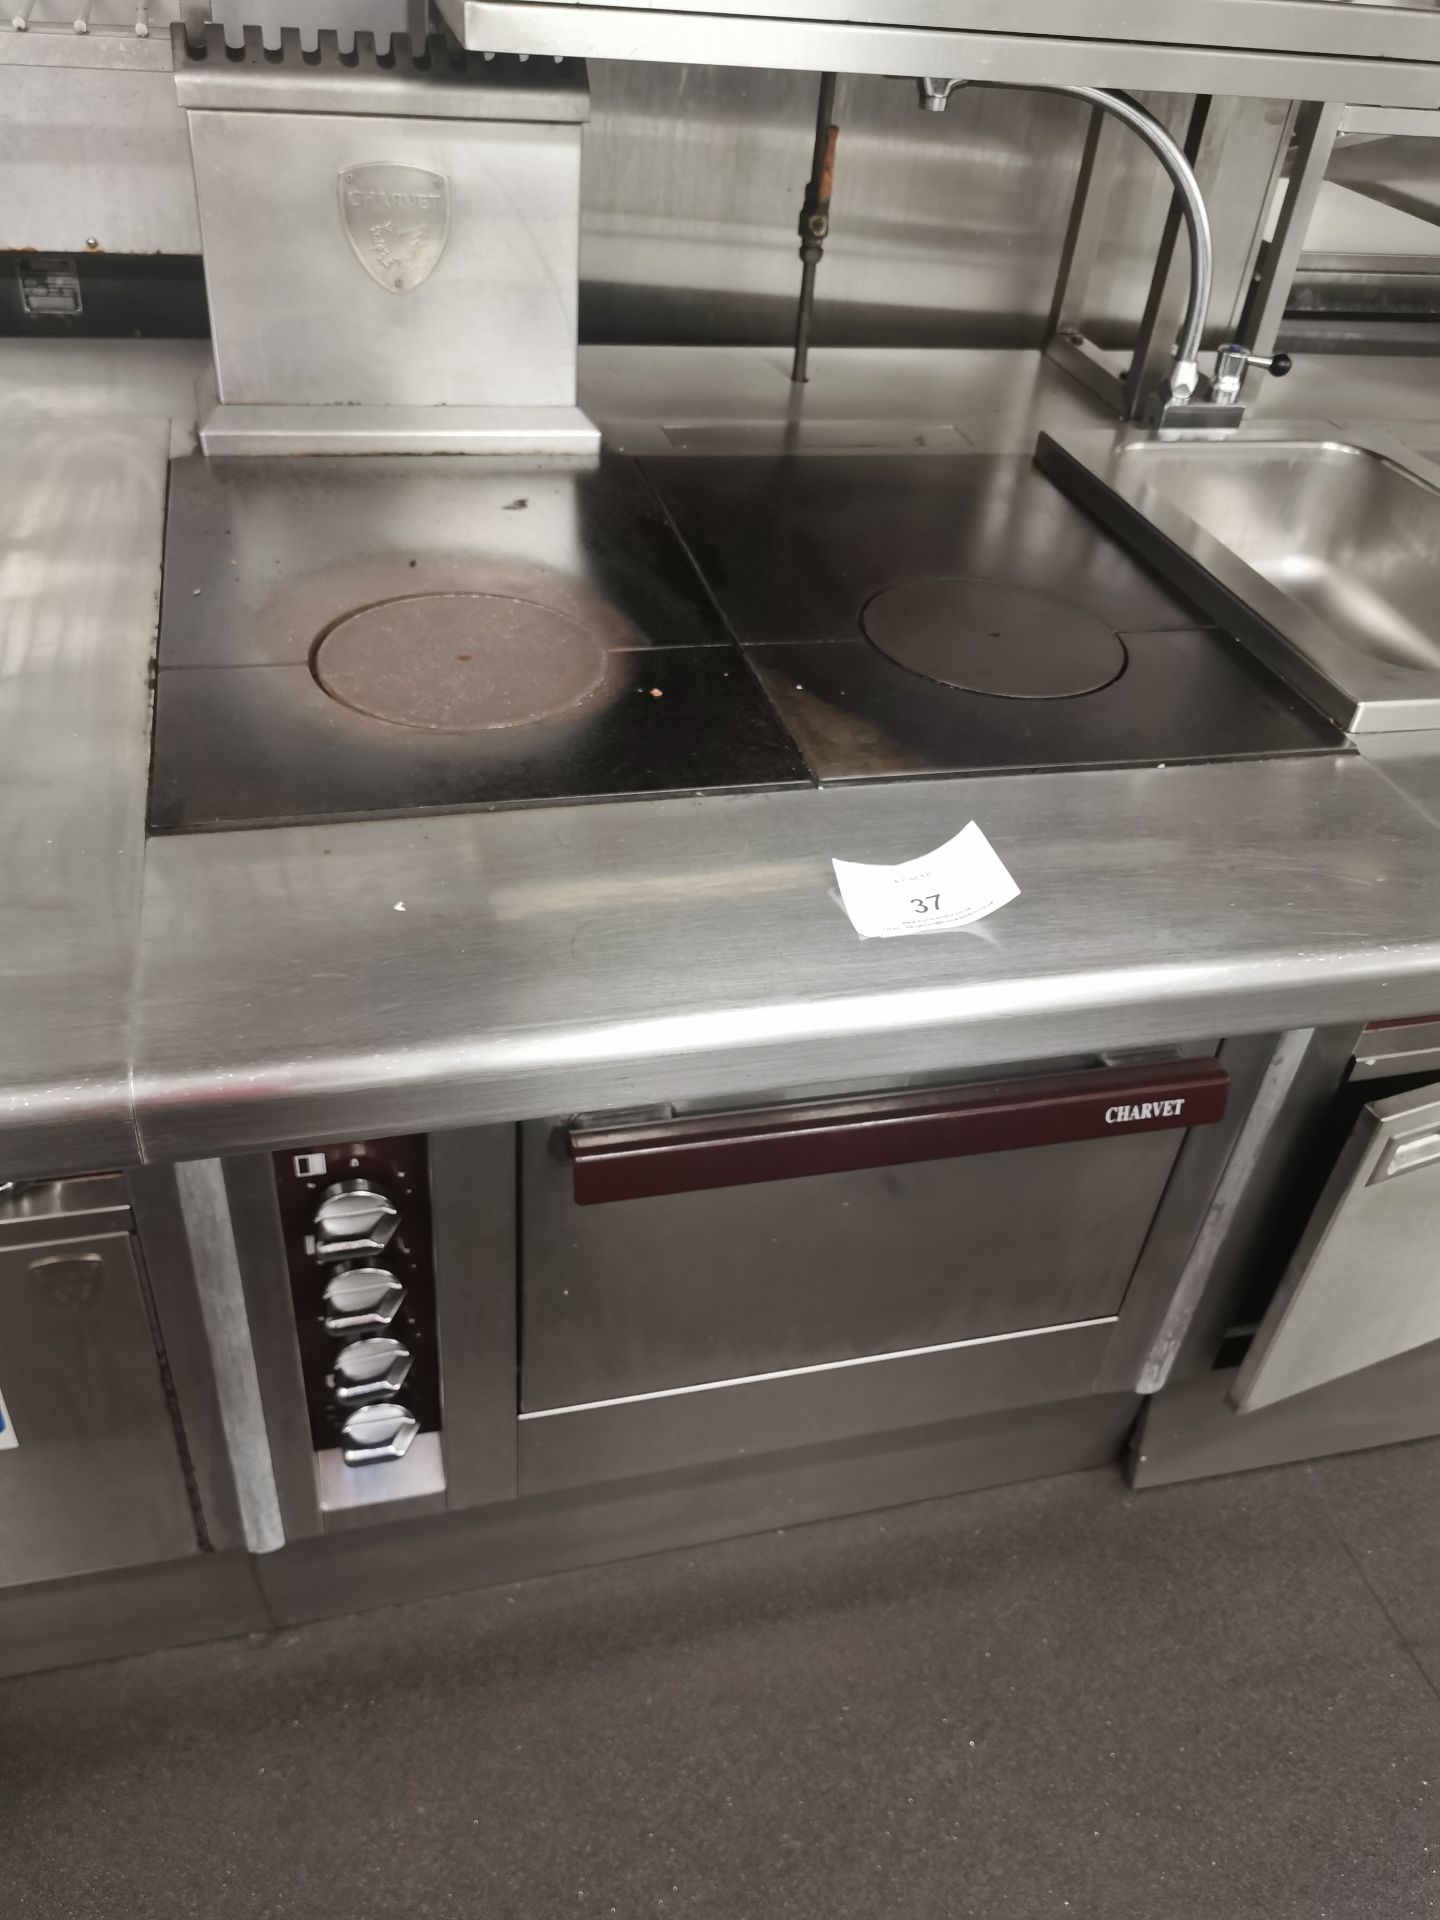 Charvet pro series twin hot plates and oven W85cm